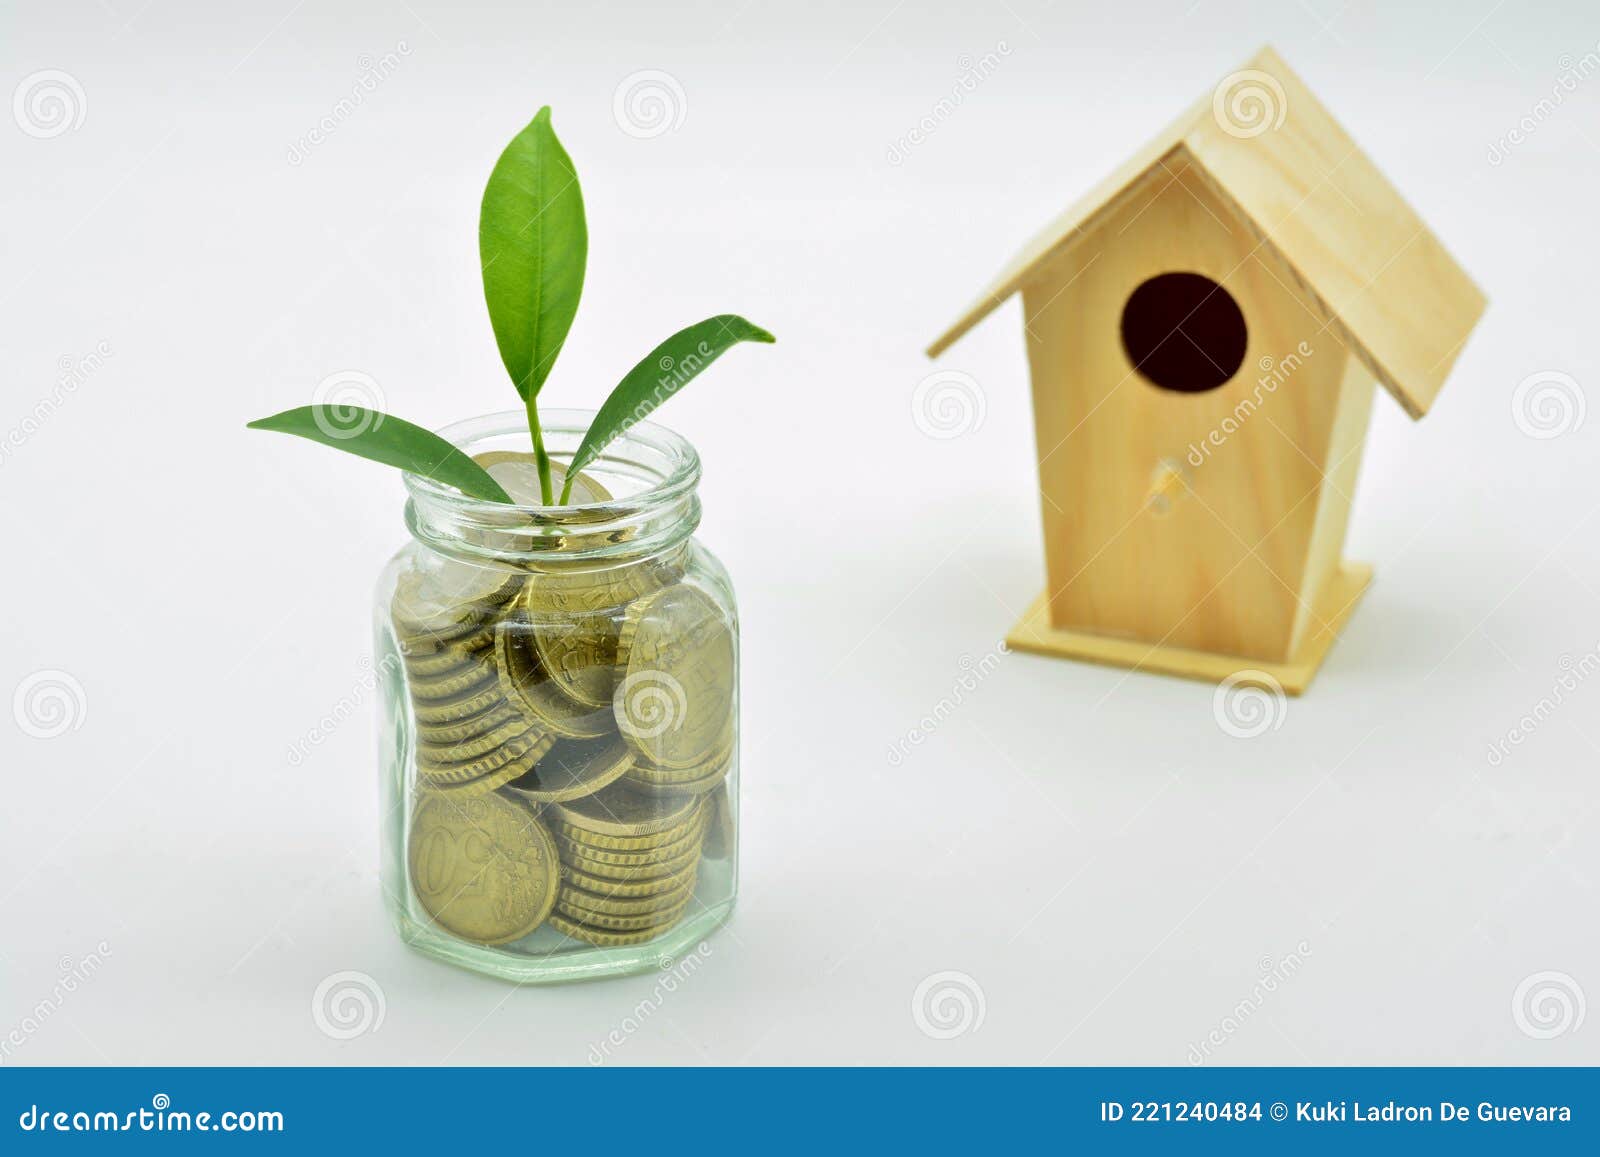 glass jar full of coins and a miniature wooden house